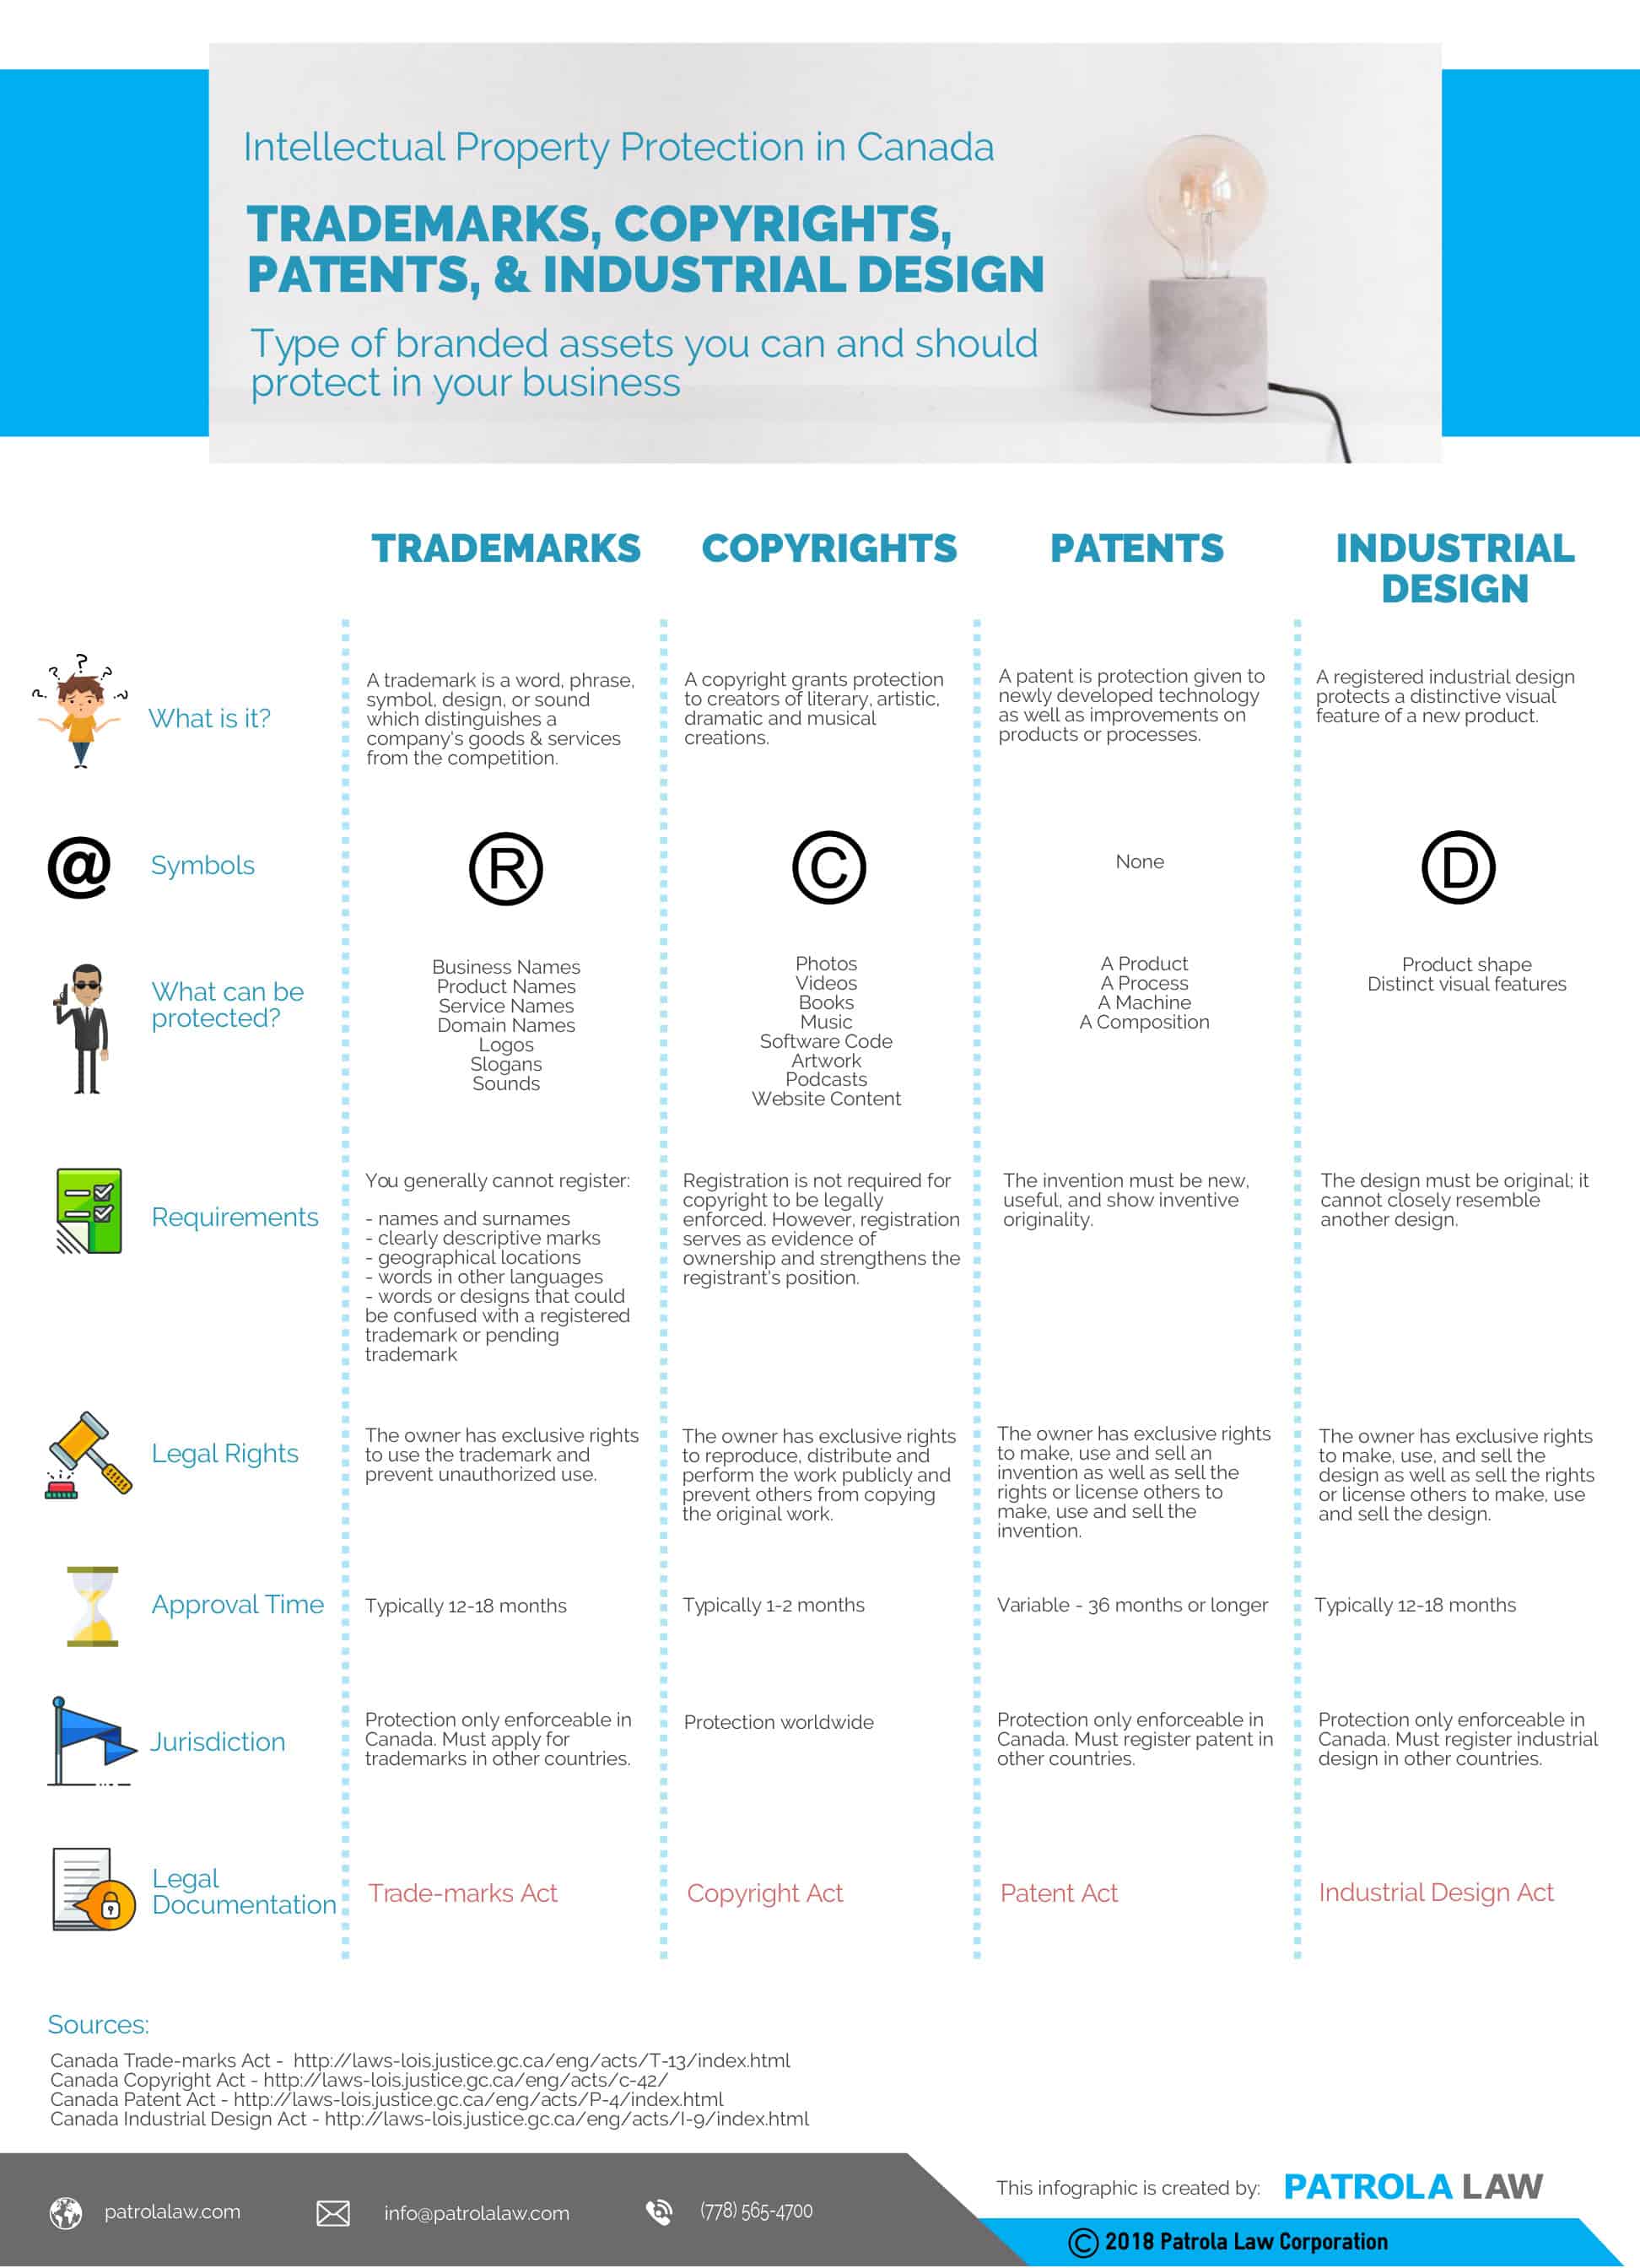 Intellectual Property in Canada Infographic